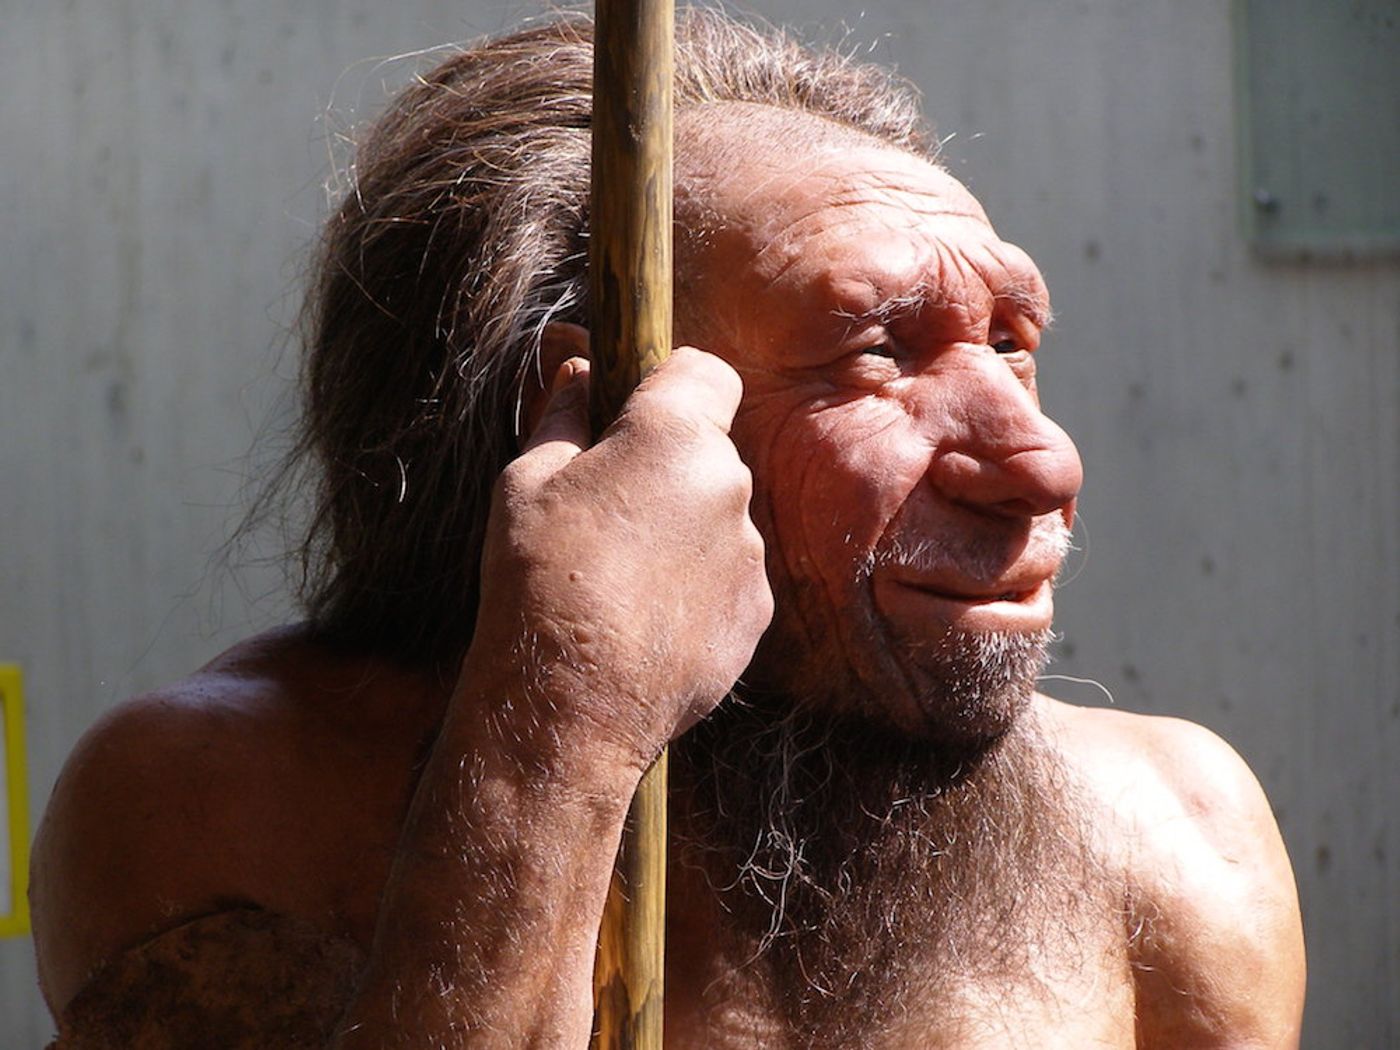 Neanderthals may have succumbed to infectious diseases carried to Europe by modern humans as they migrated out of Africa